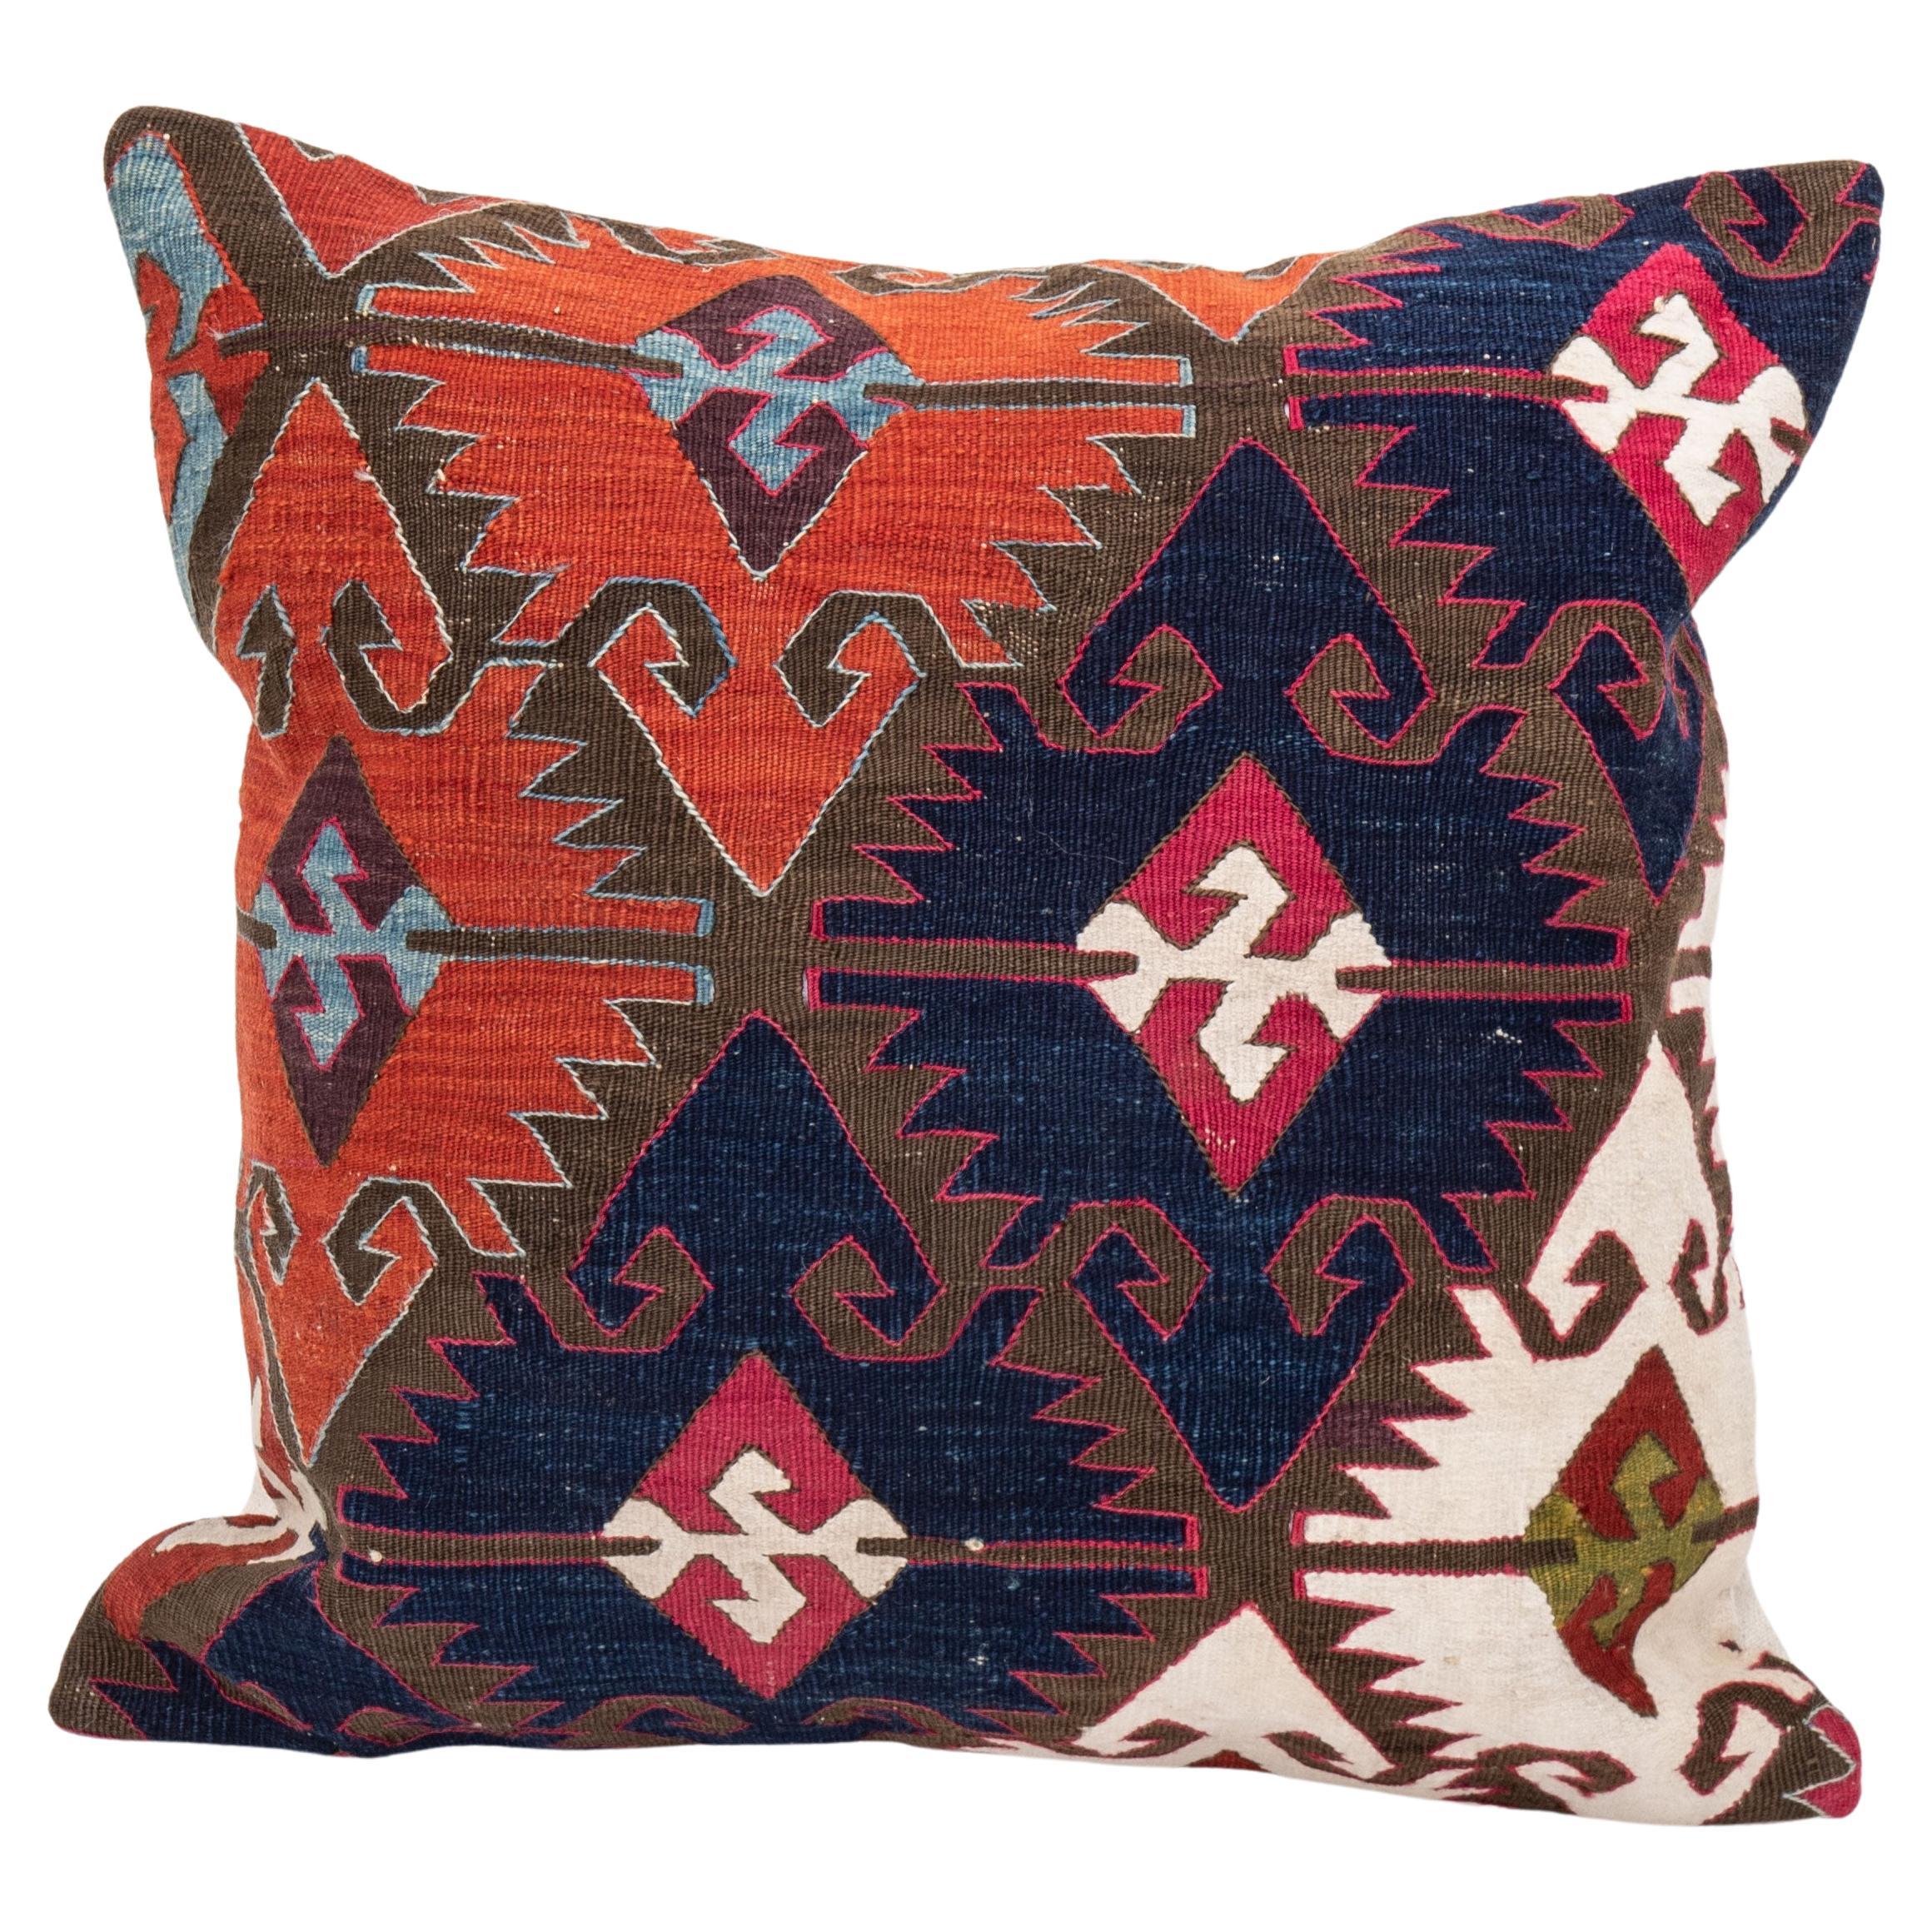 Pillow Case Made from an Antique Anatolian Kilim